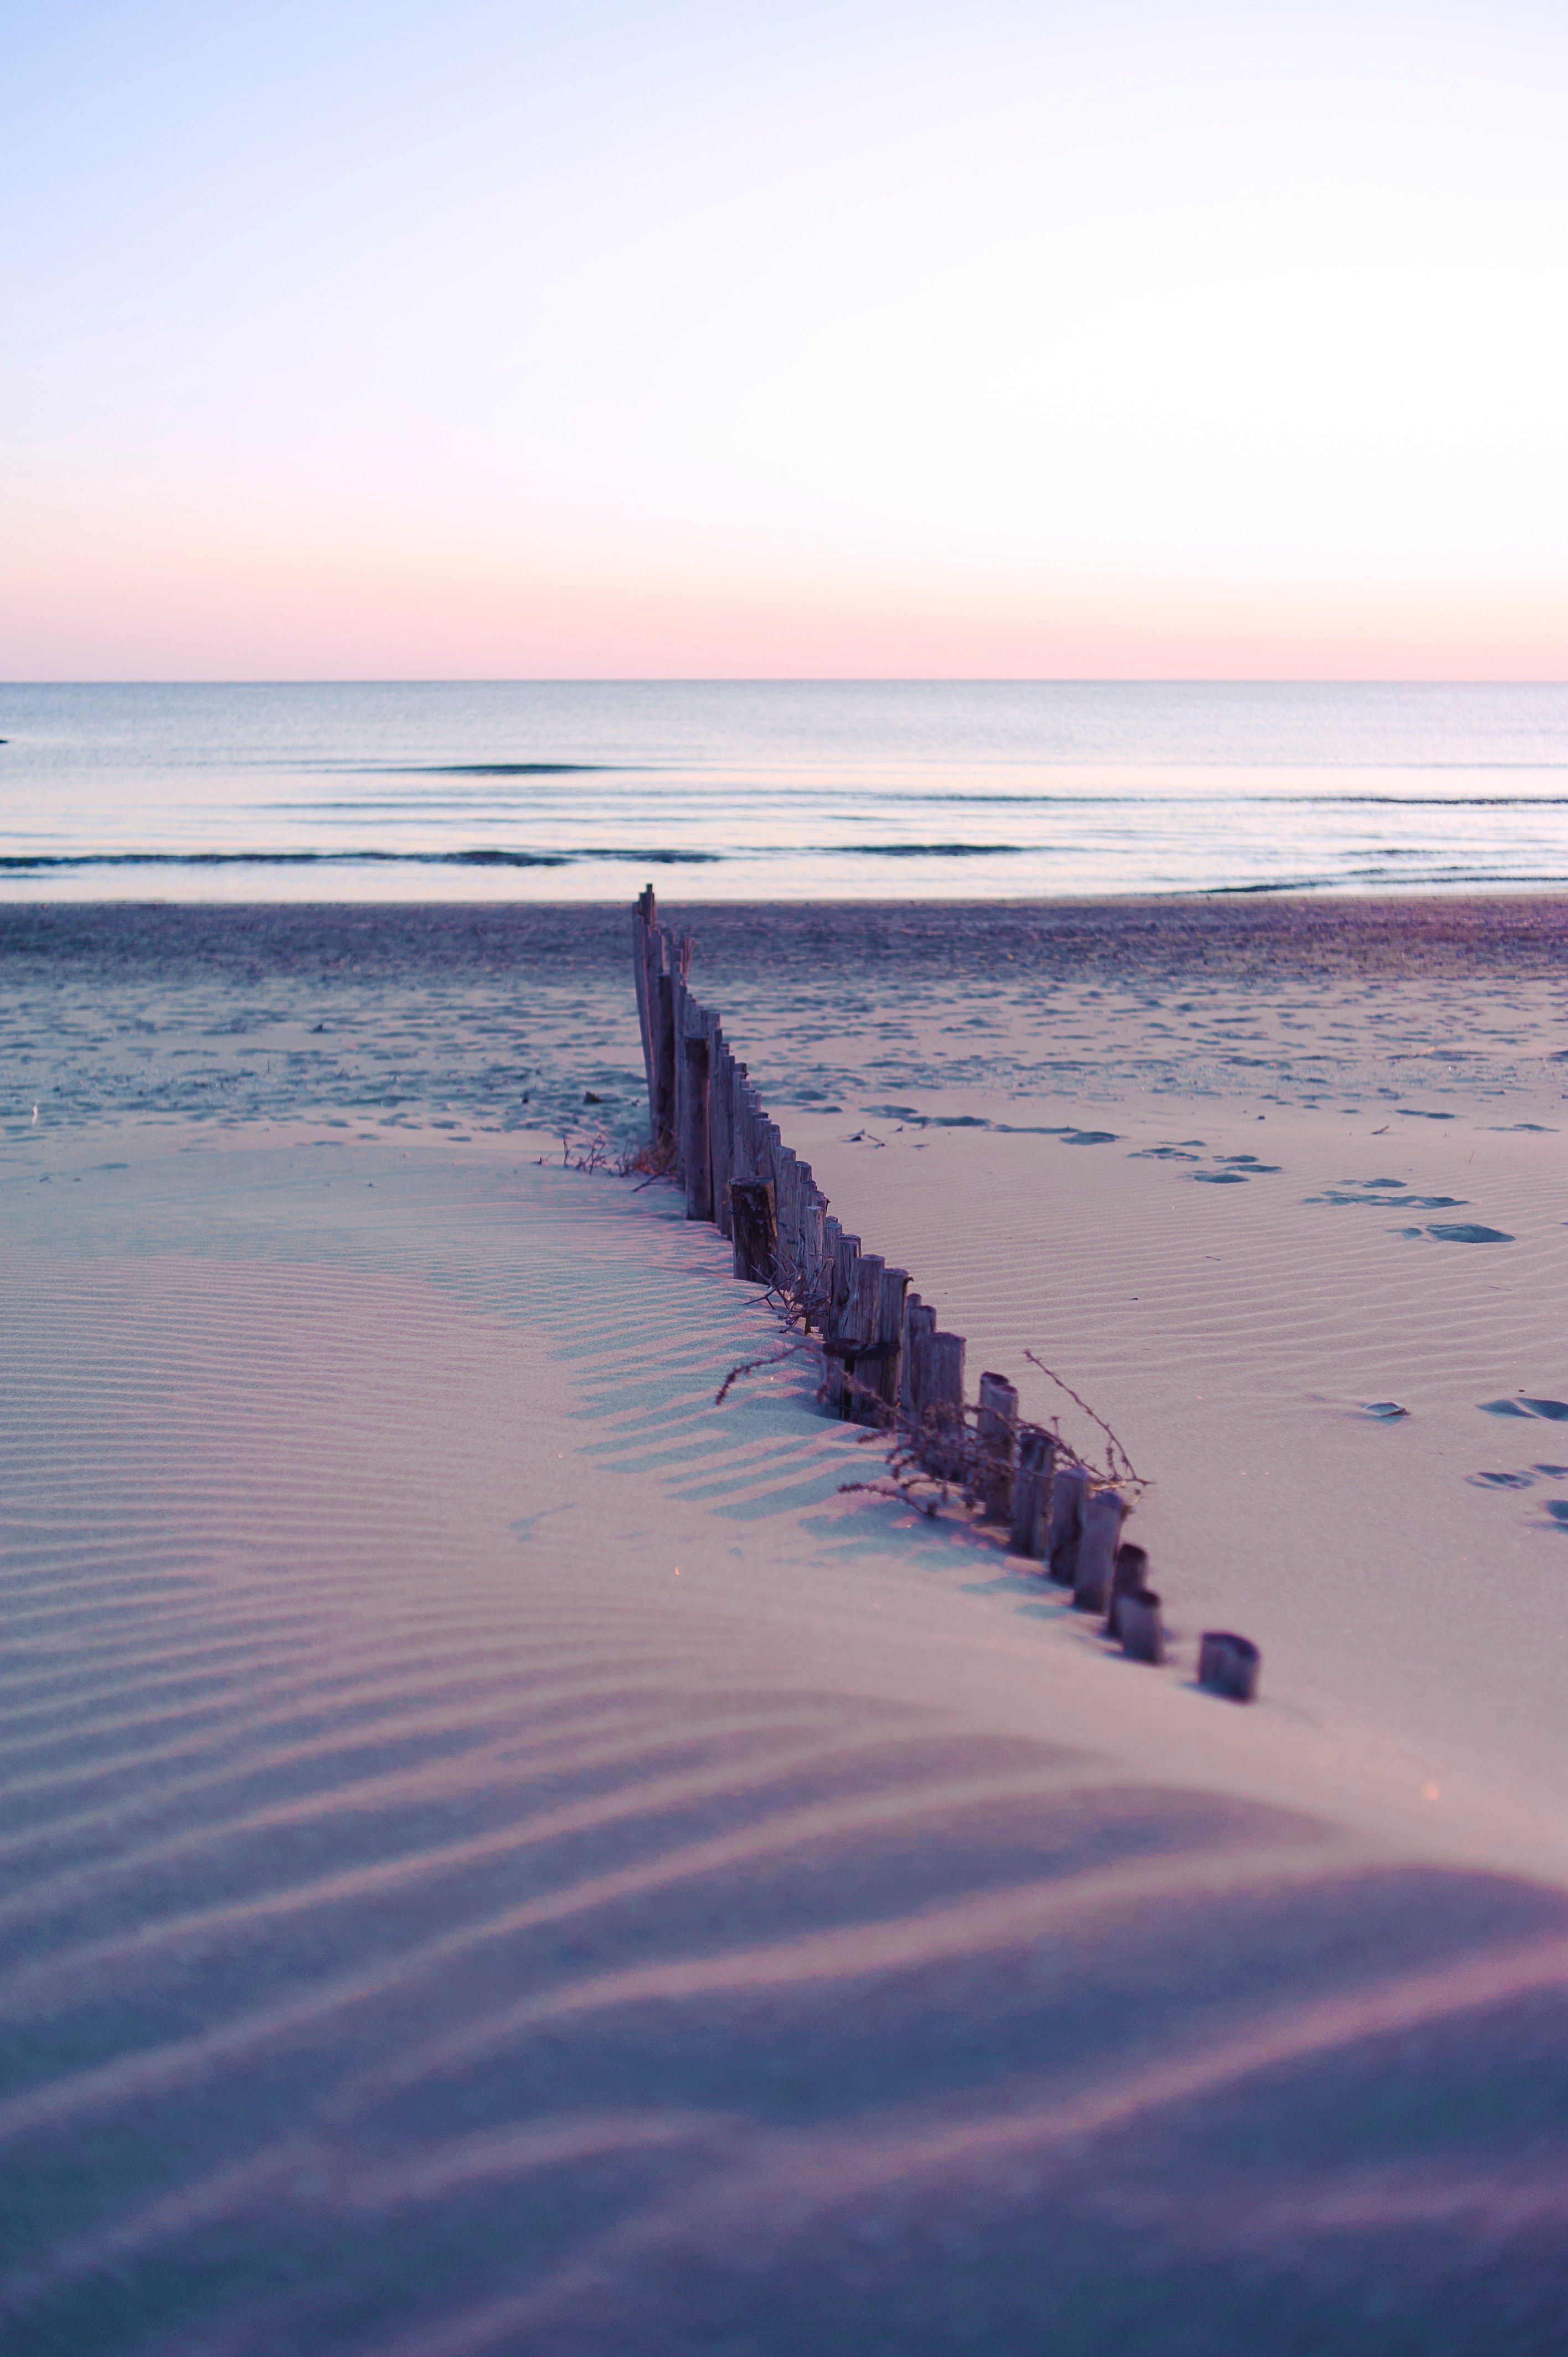 A wooden fence is on the beach - Sunrise